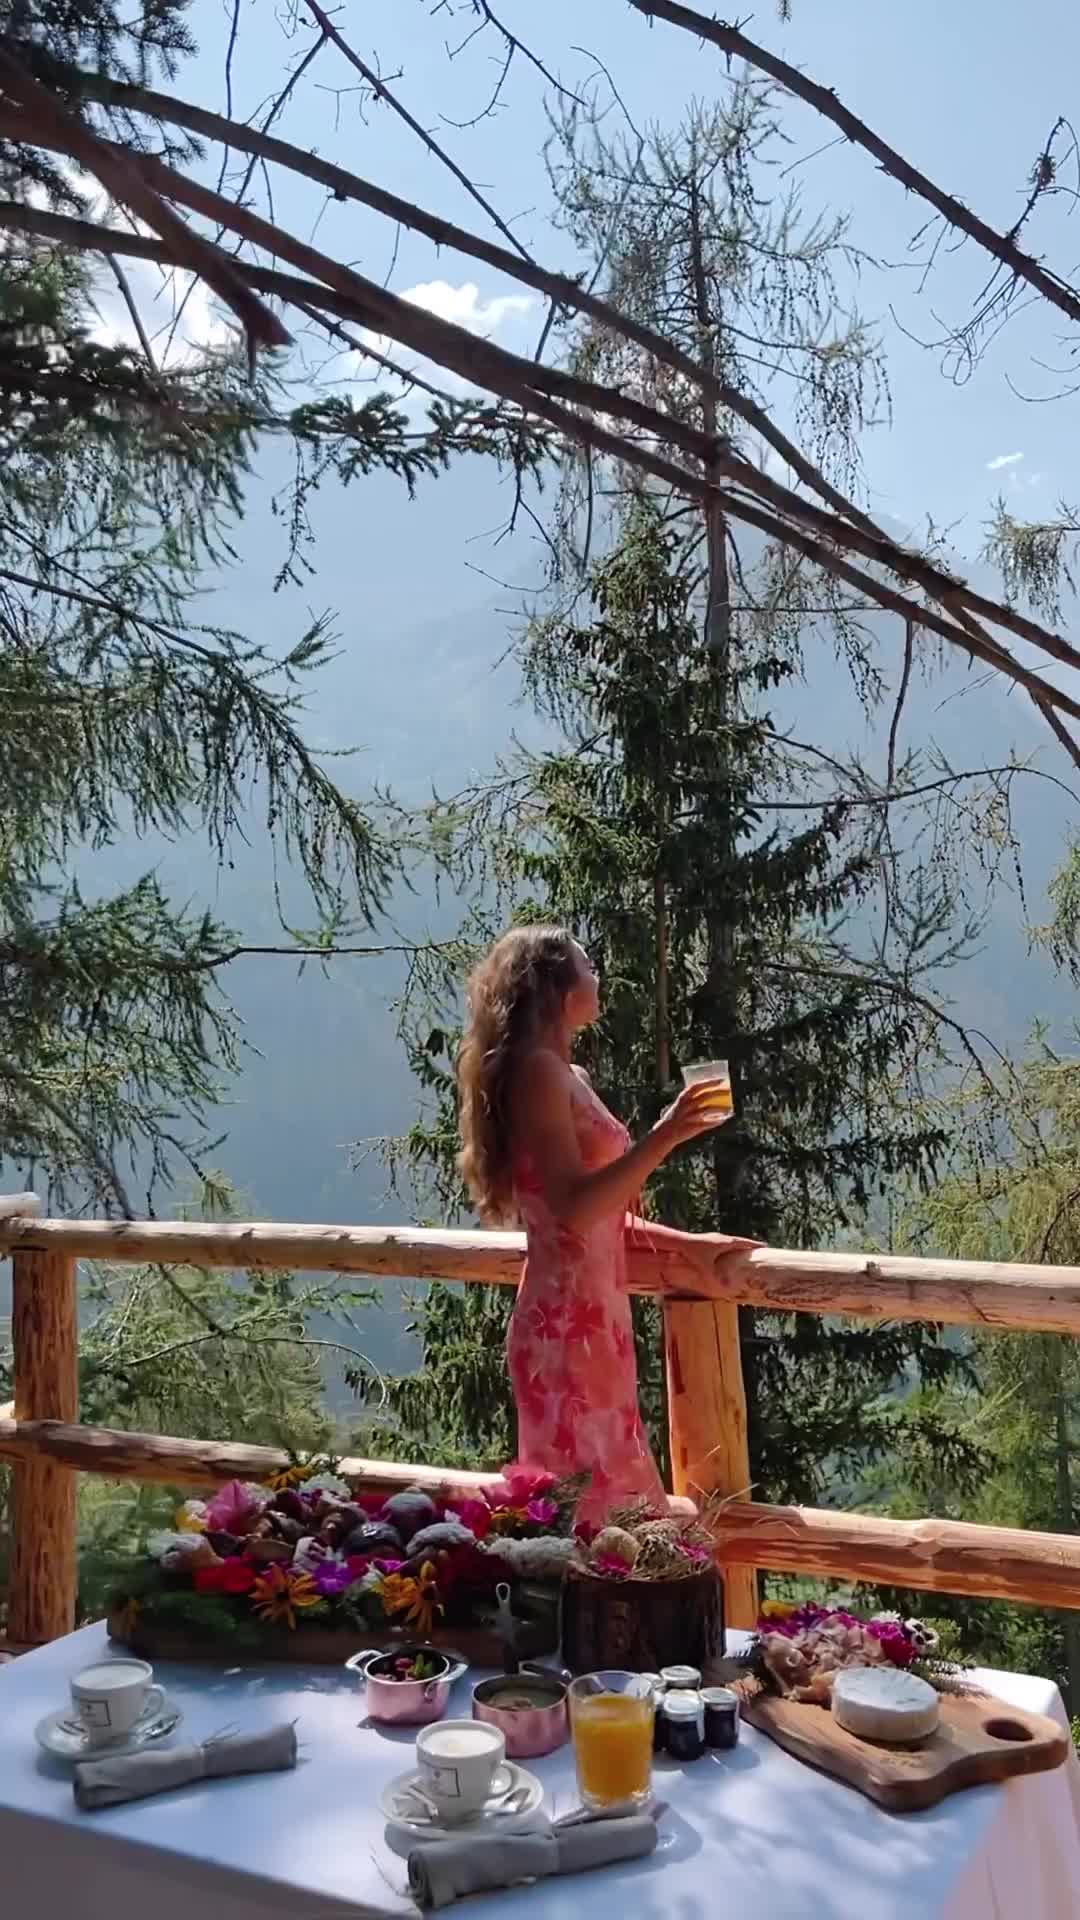 Breakfast in the Treetops at Chalet al Foss, Italy